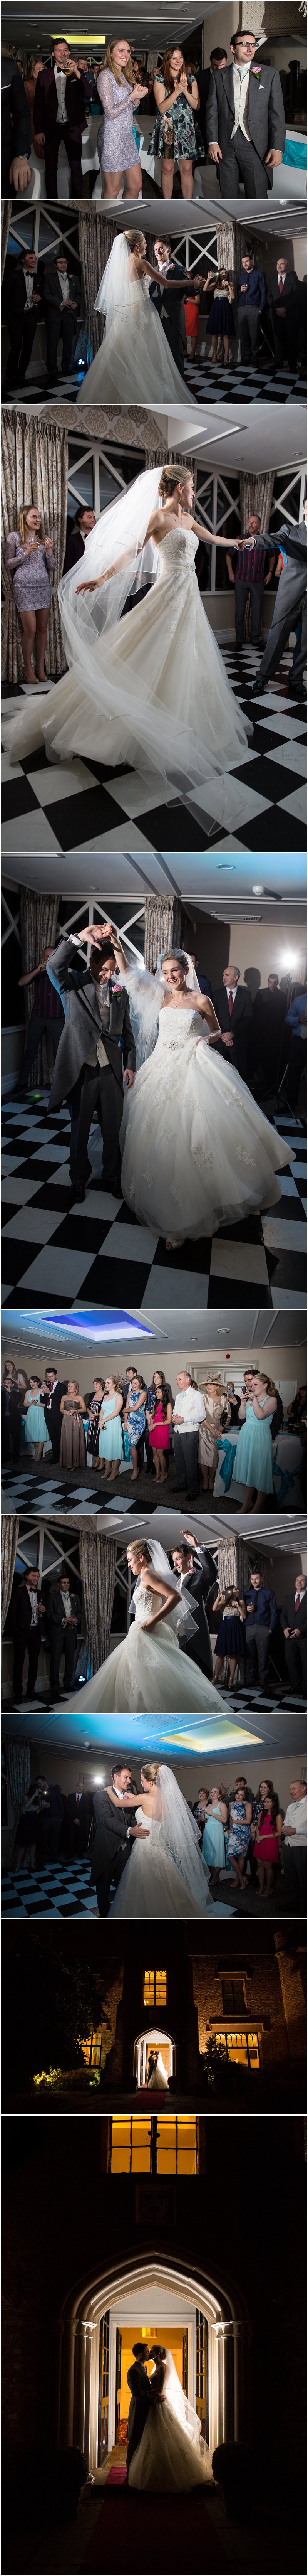 First Dance at Crabwall Manor wedding Chester